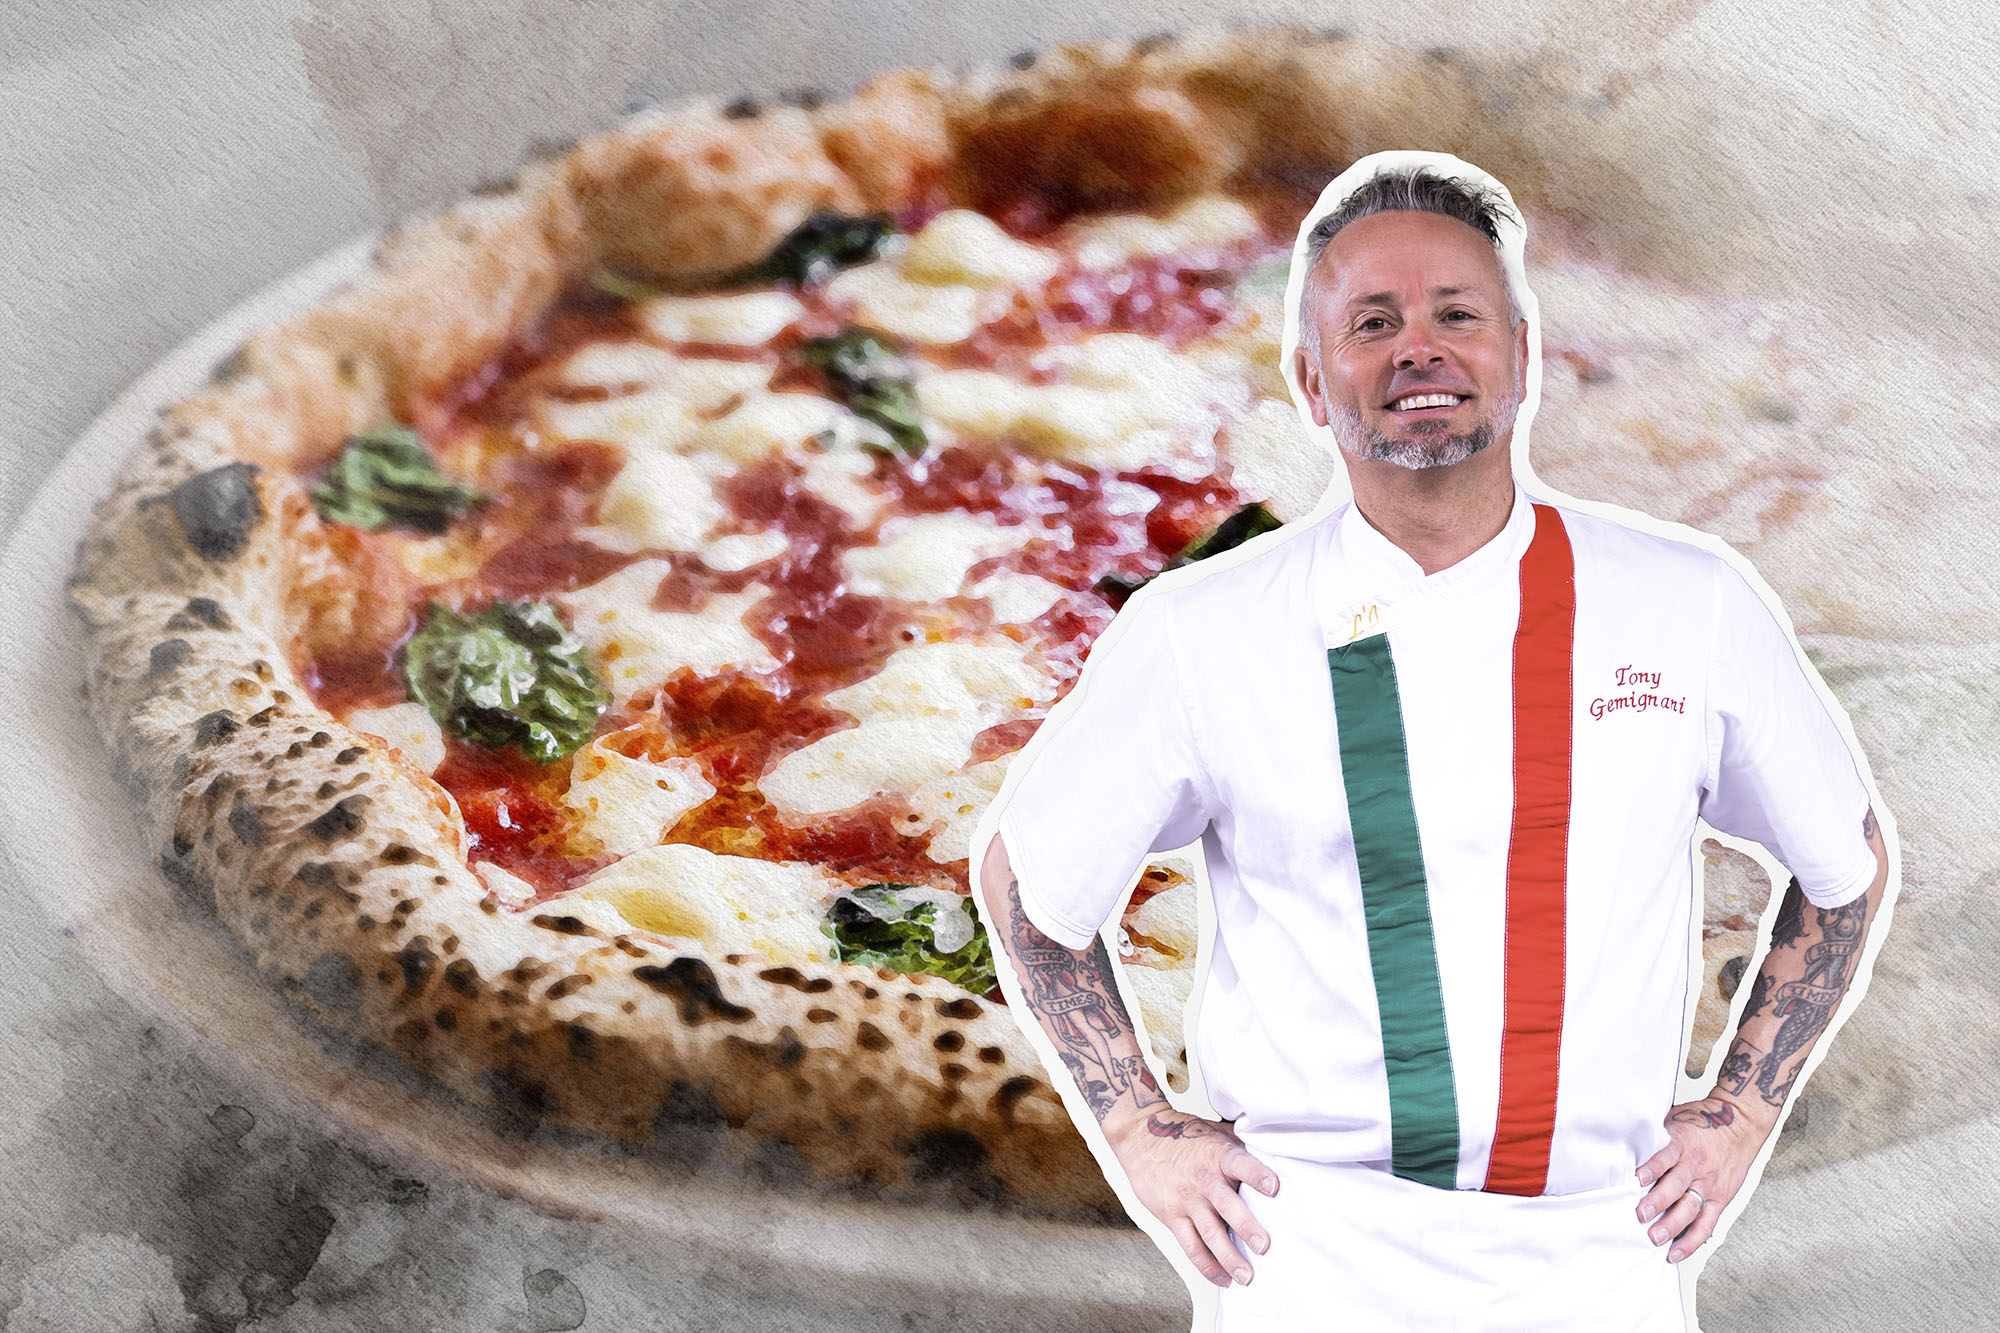 World Pizza Champion Shares His Secrets to the Best Homemade Pizza